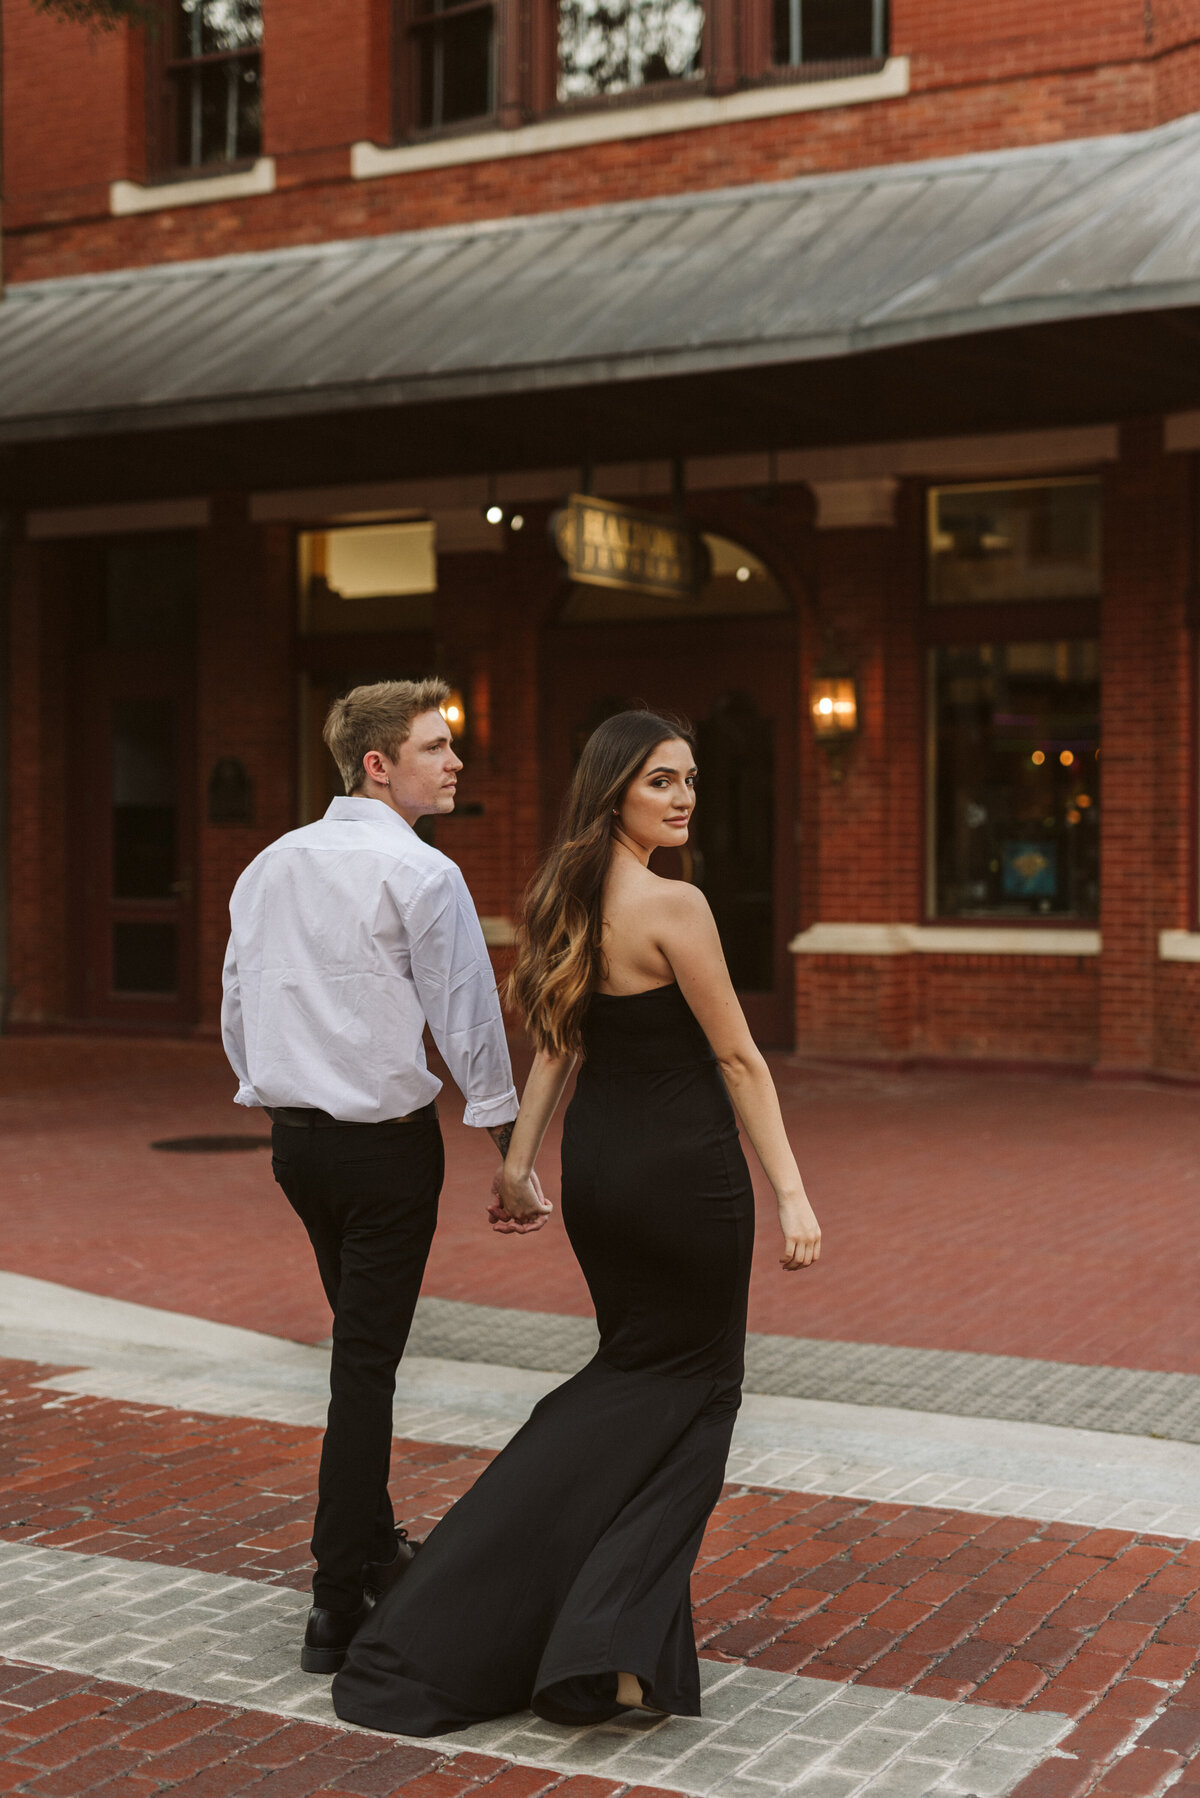 Natalie-and-Codi-engagement-session-at-sundance-sqaure-fort-worth-by-bruna-kitchen-photography-31